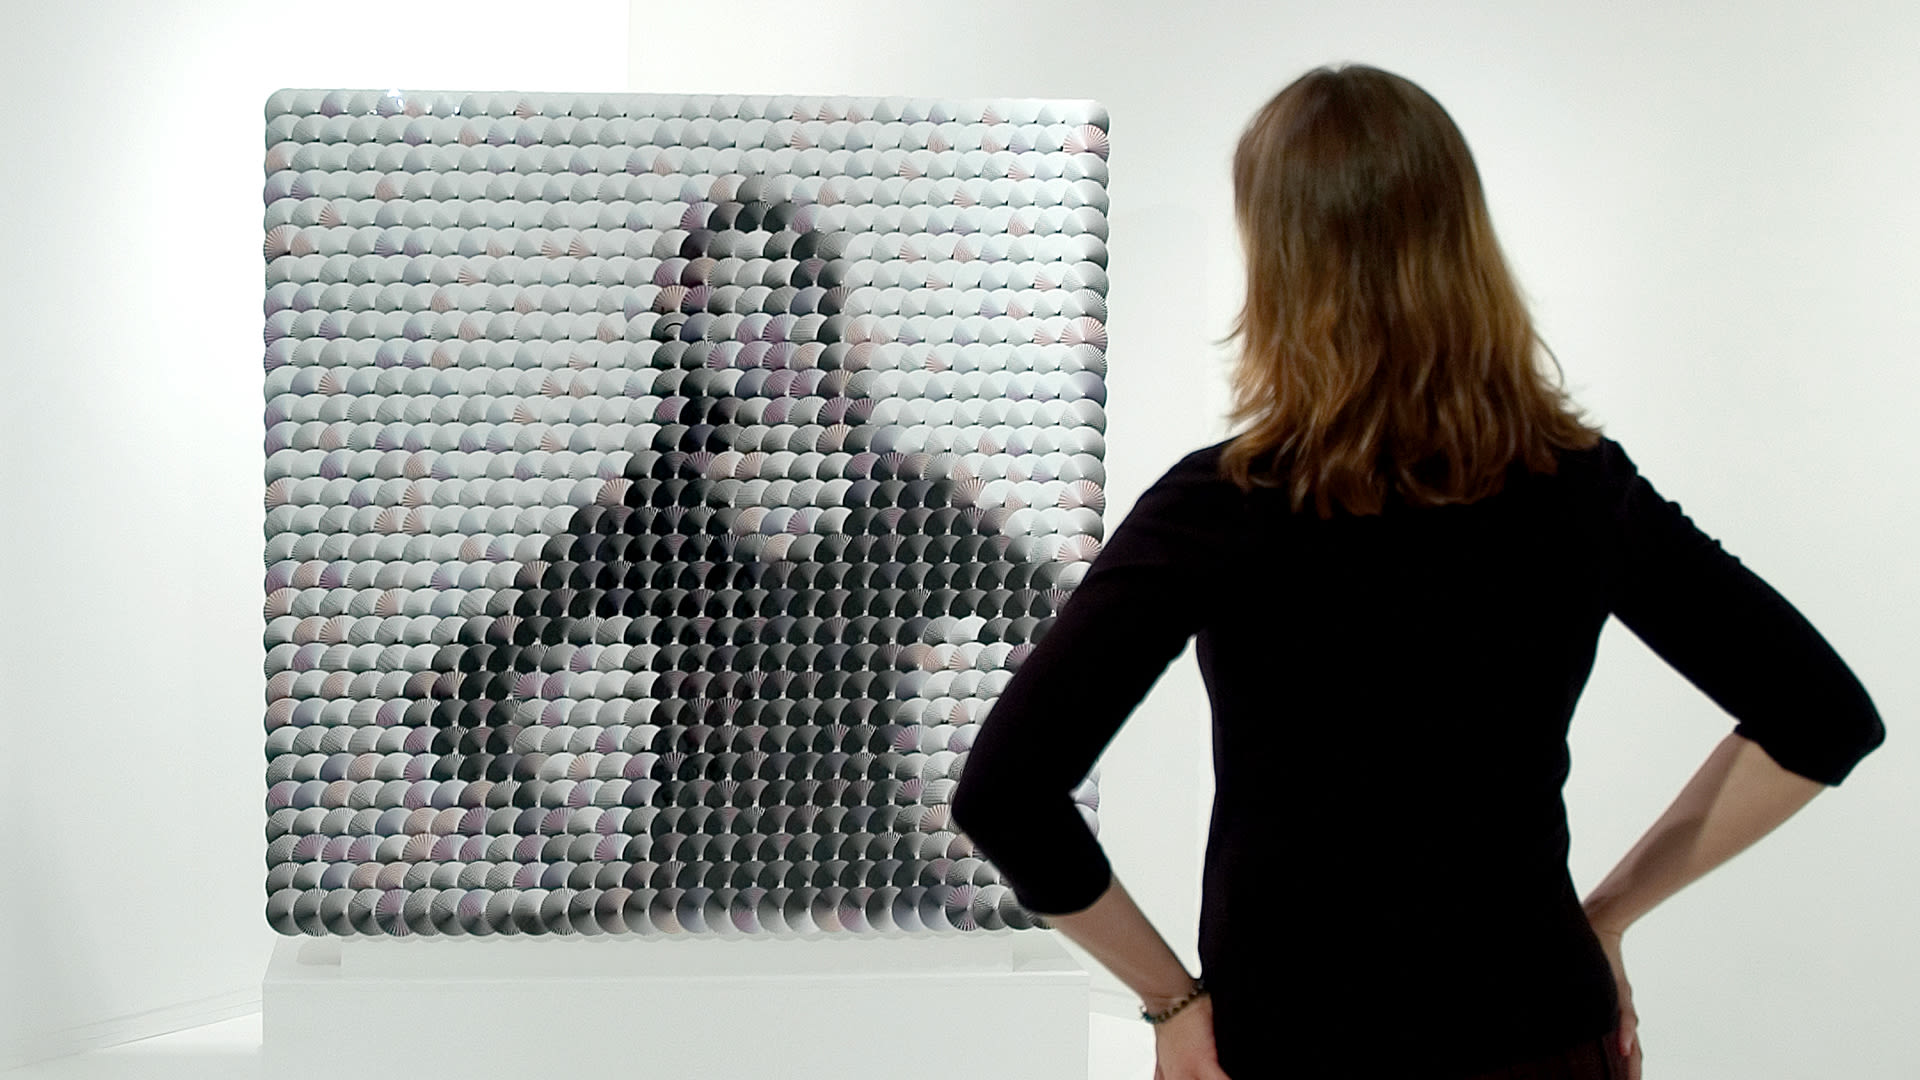 Mesmerizing art created with magnetic liquid - CNET